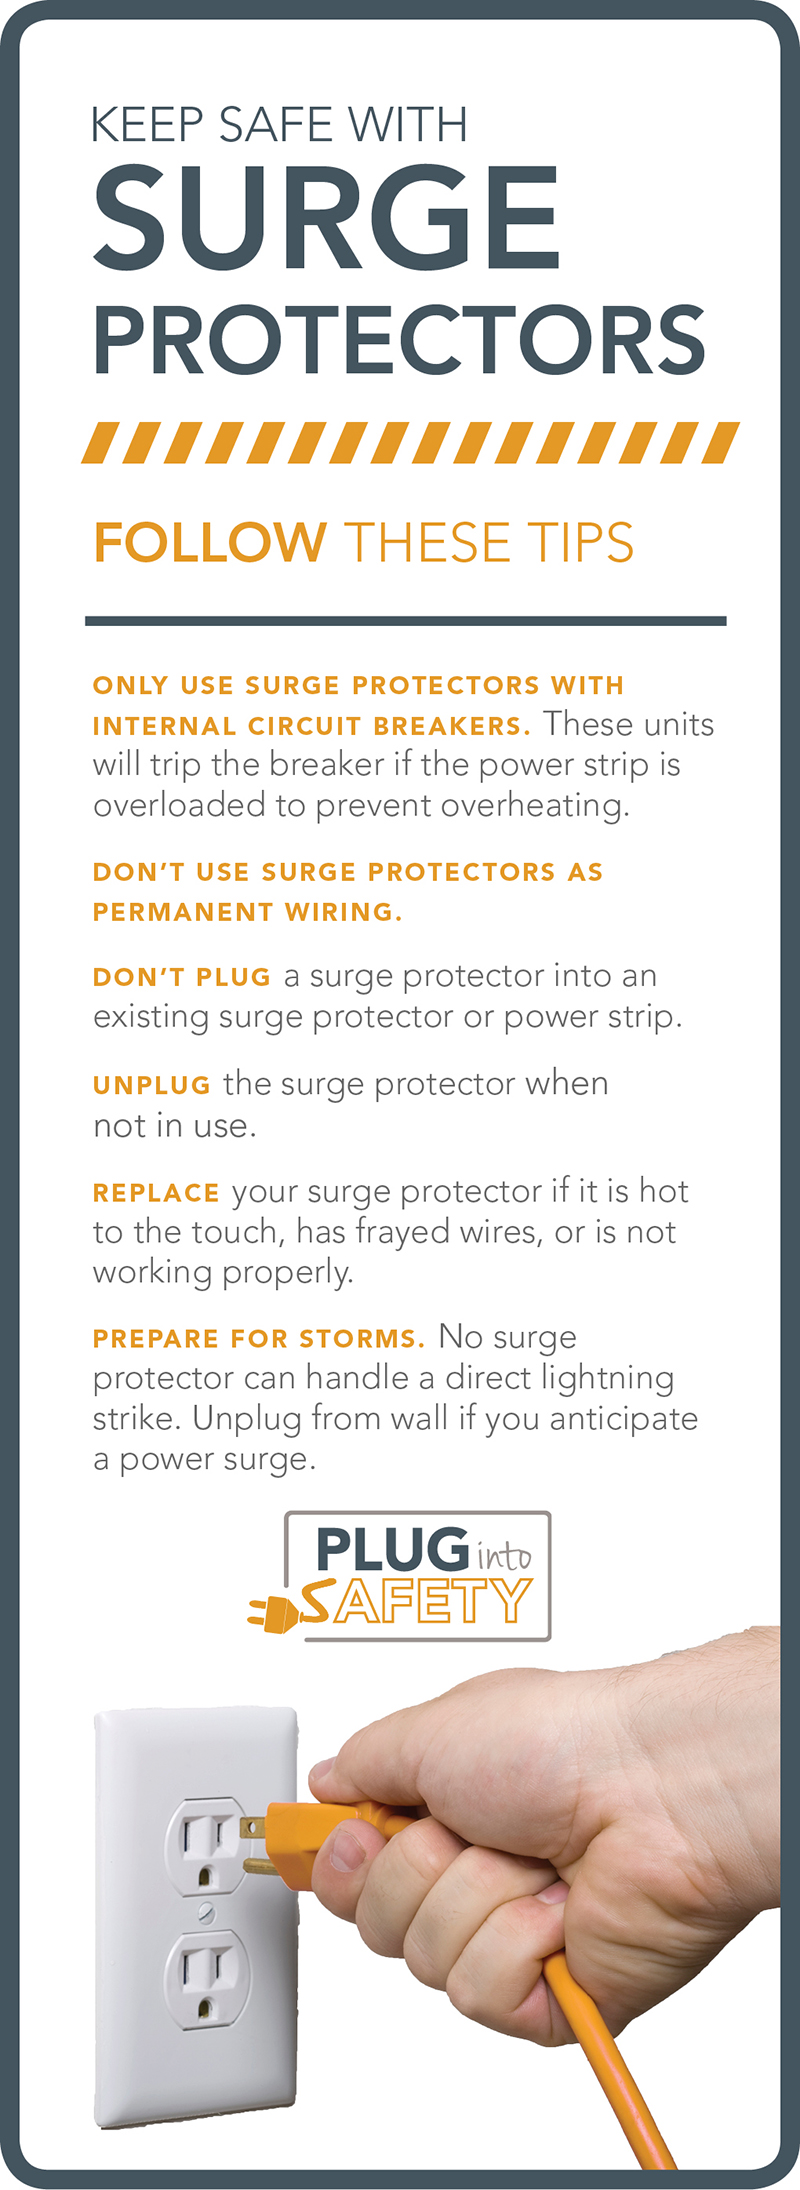 Keep safe with surge protectors.